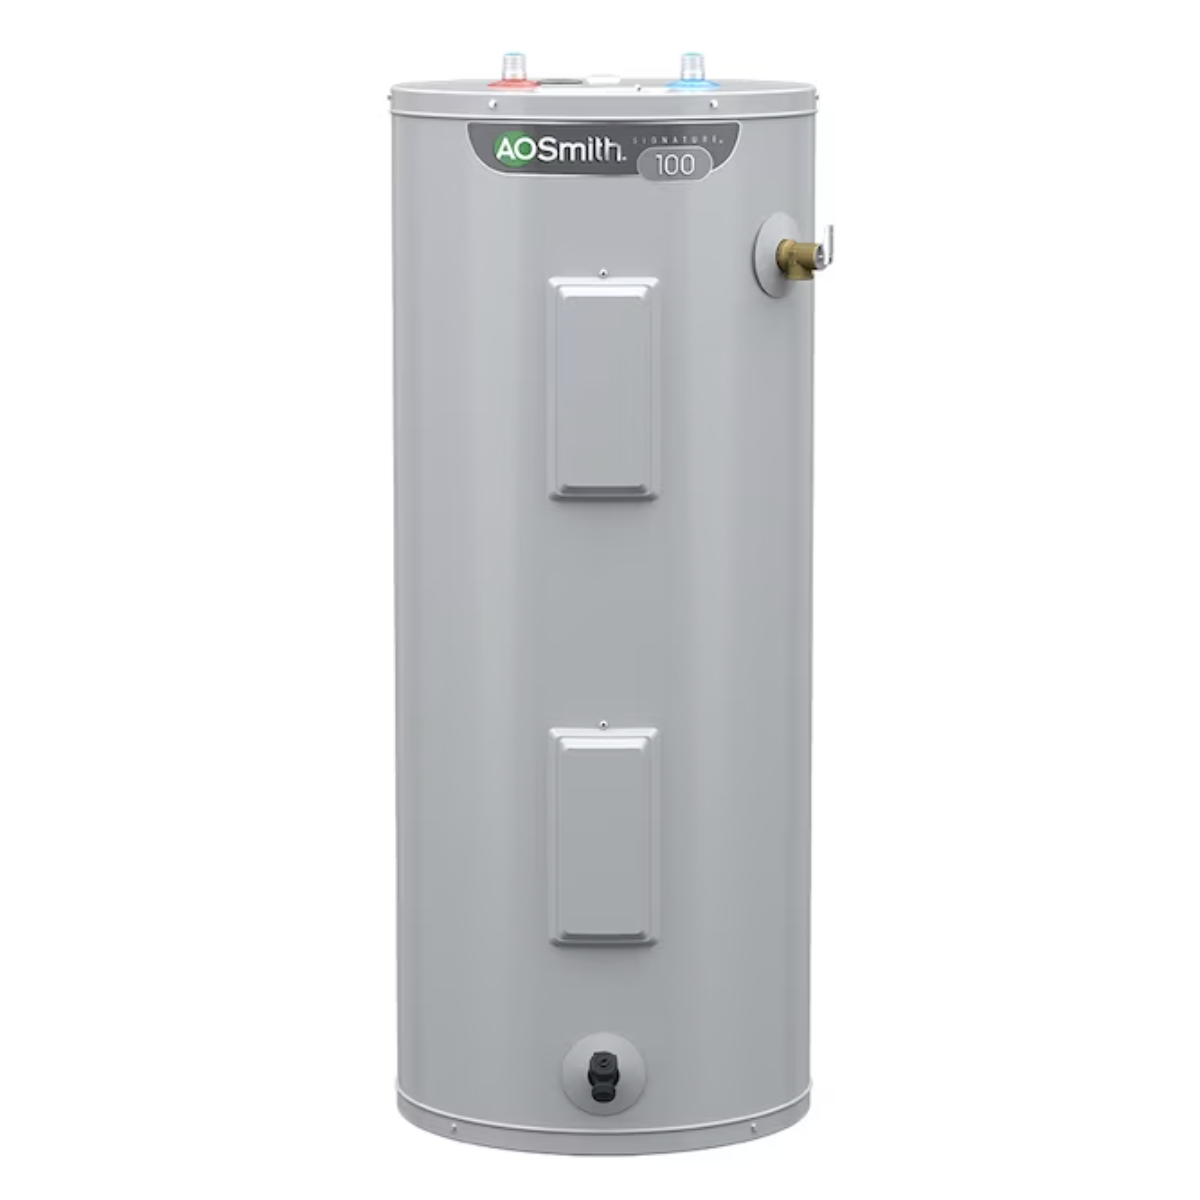 A.O. Smith - Signature 100 40 Gallon Tall 4500-Watt Double Element Electric Water Heater